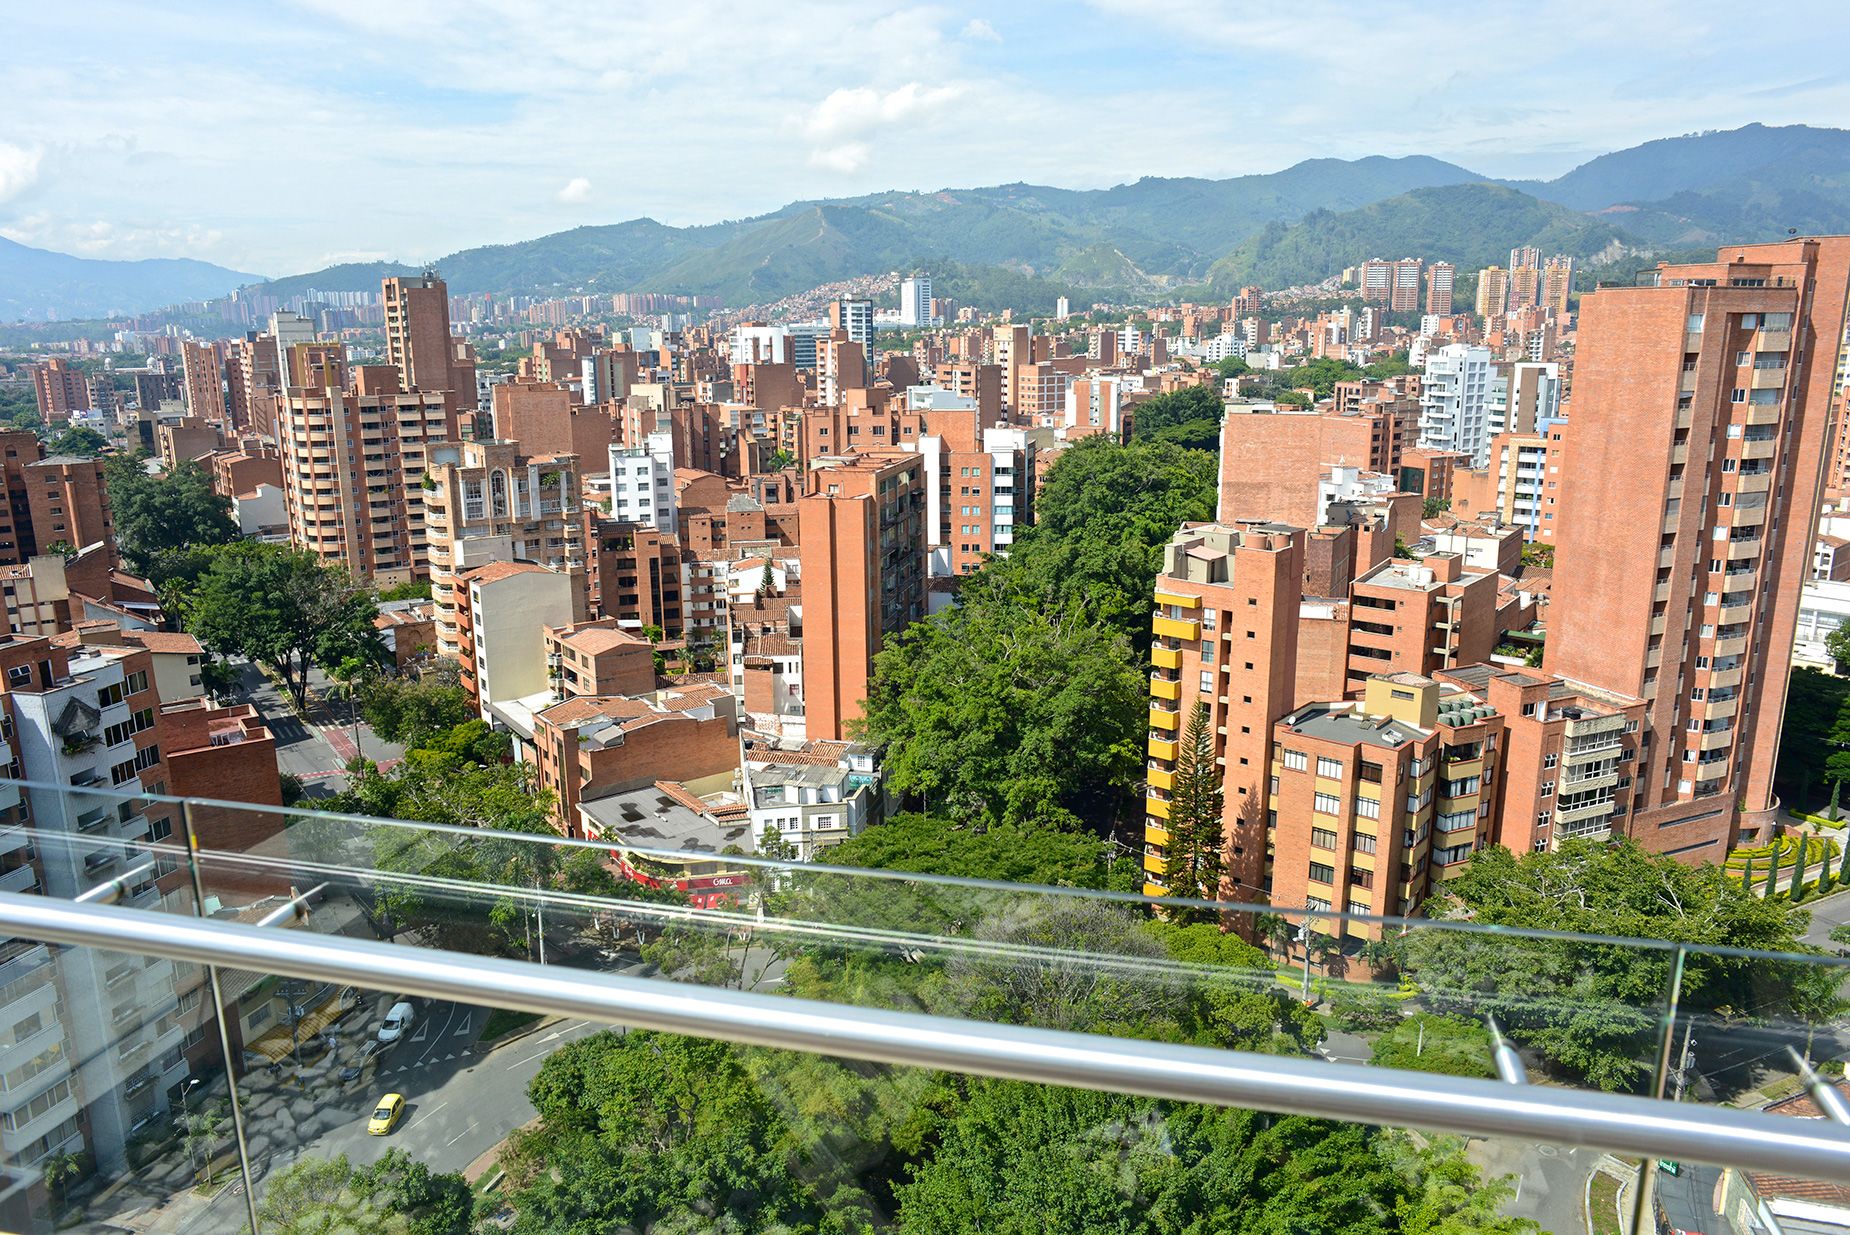 Balzano recently bought an apartment in Laureles, Medellin, recently named as Time Out's 'coolest neighborhood' in the world.